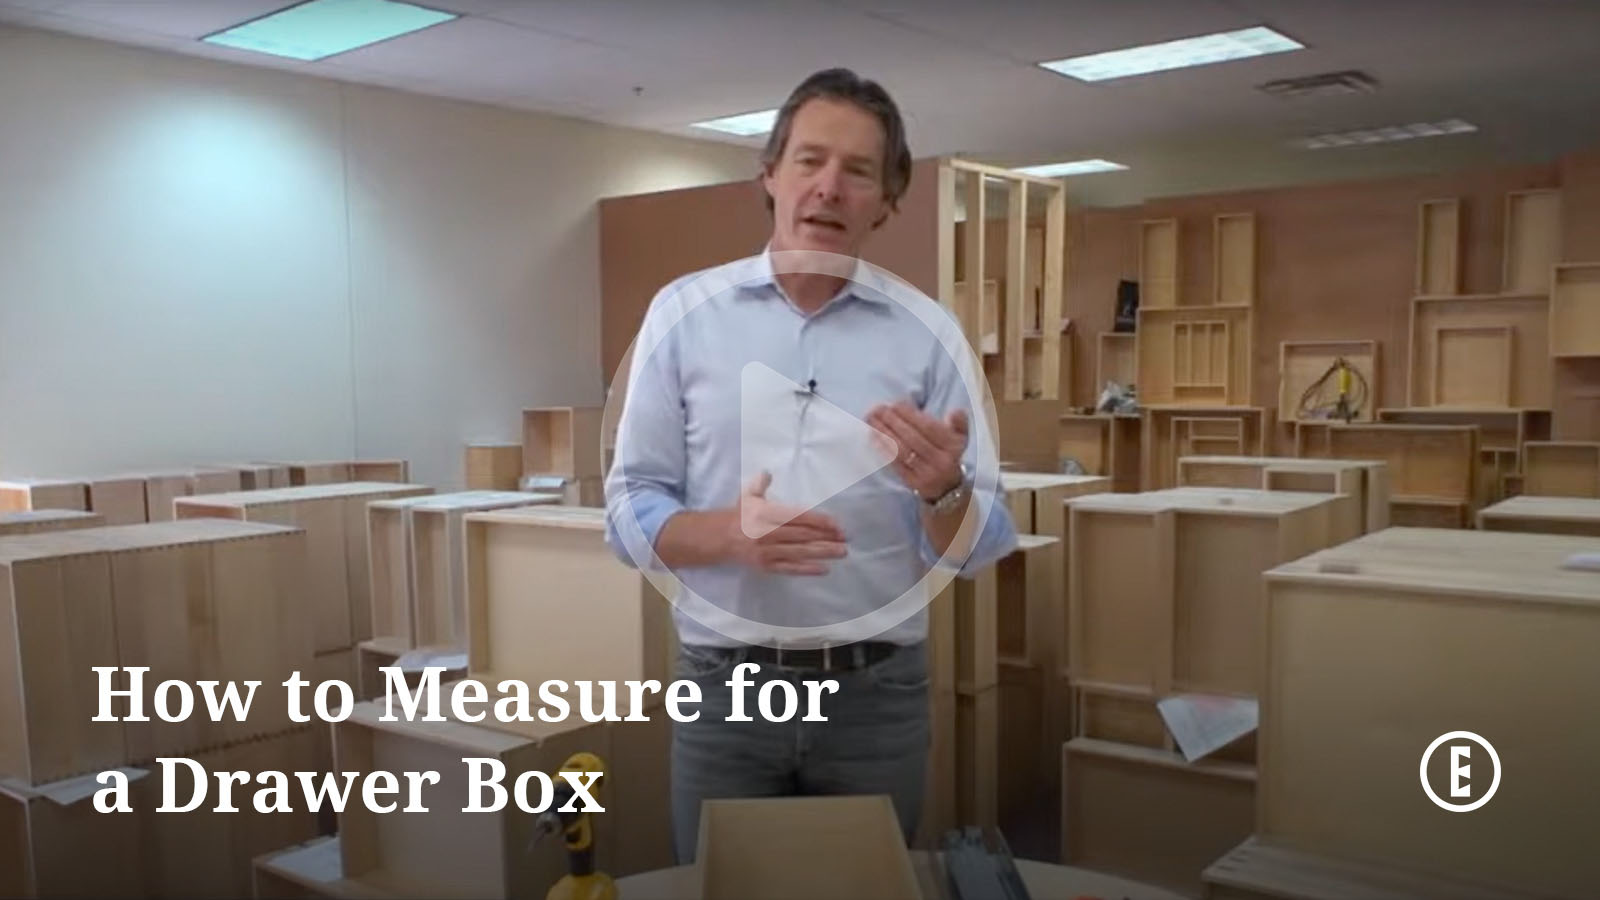 Video: How to Measure for a Drawer Box